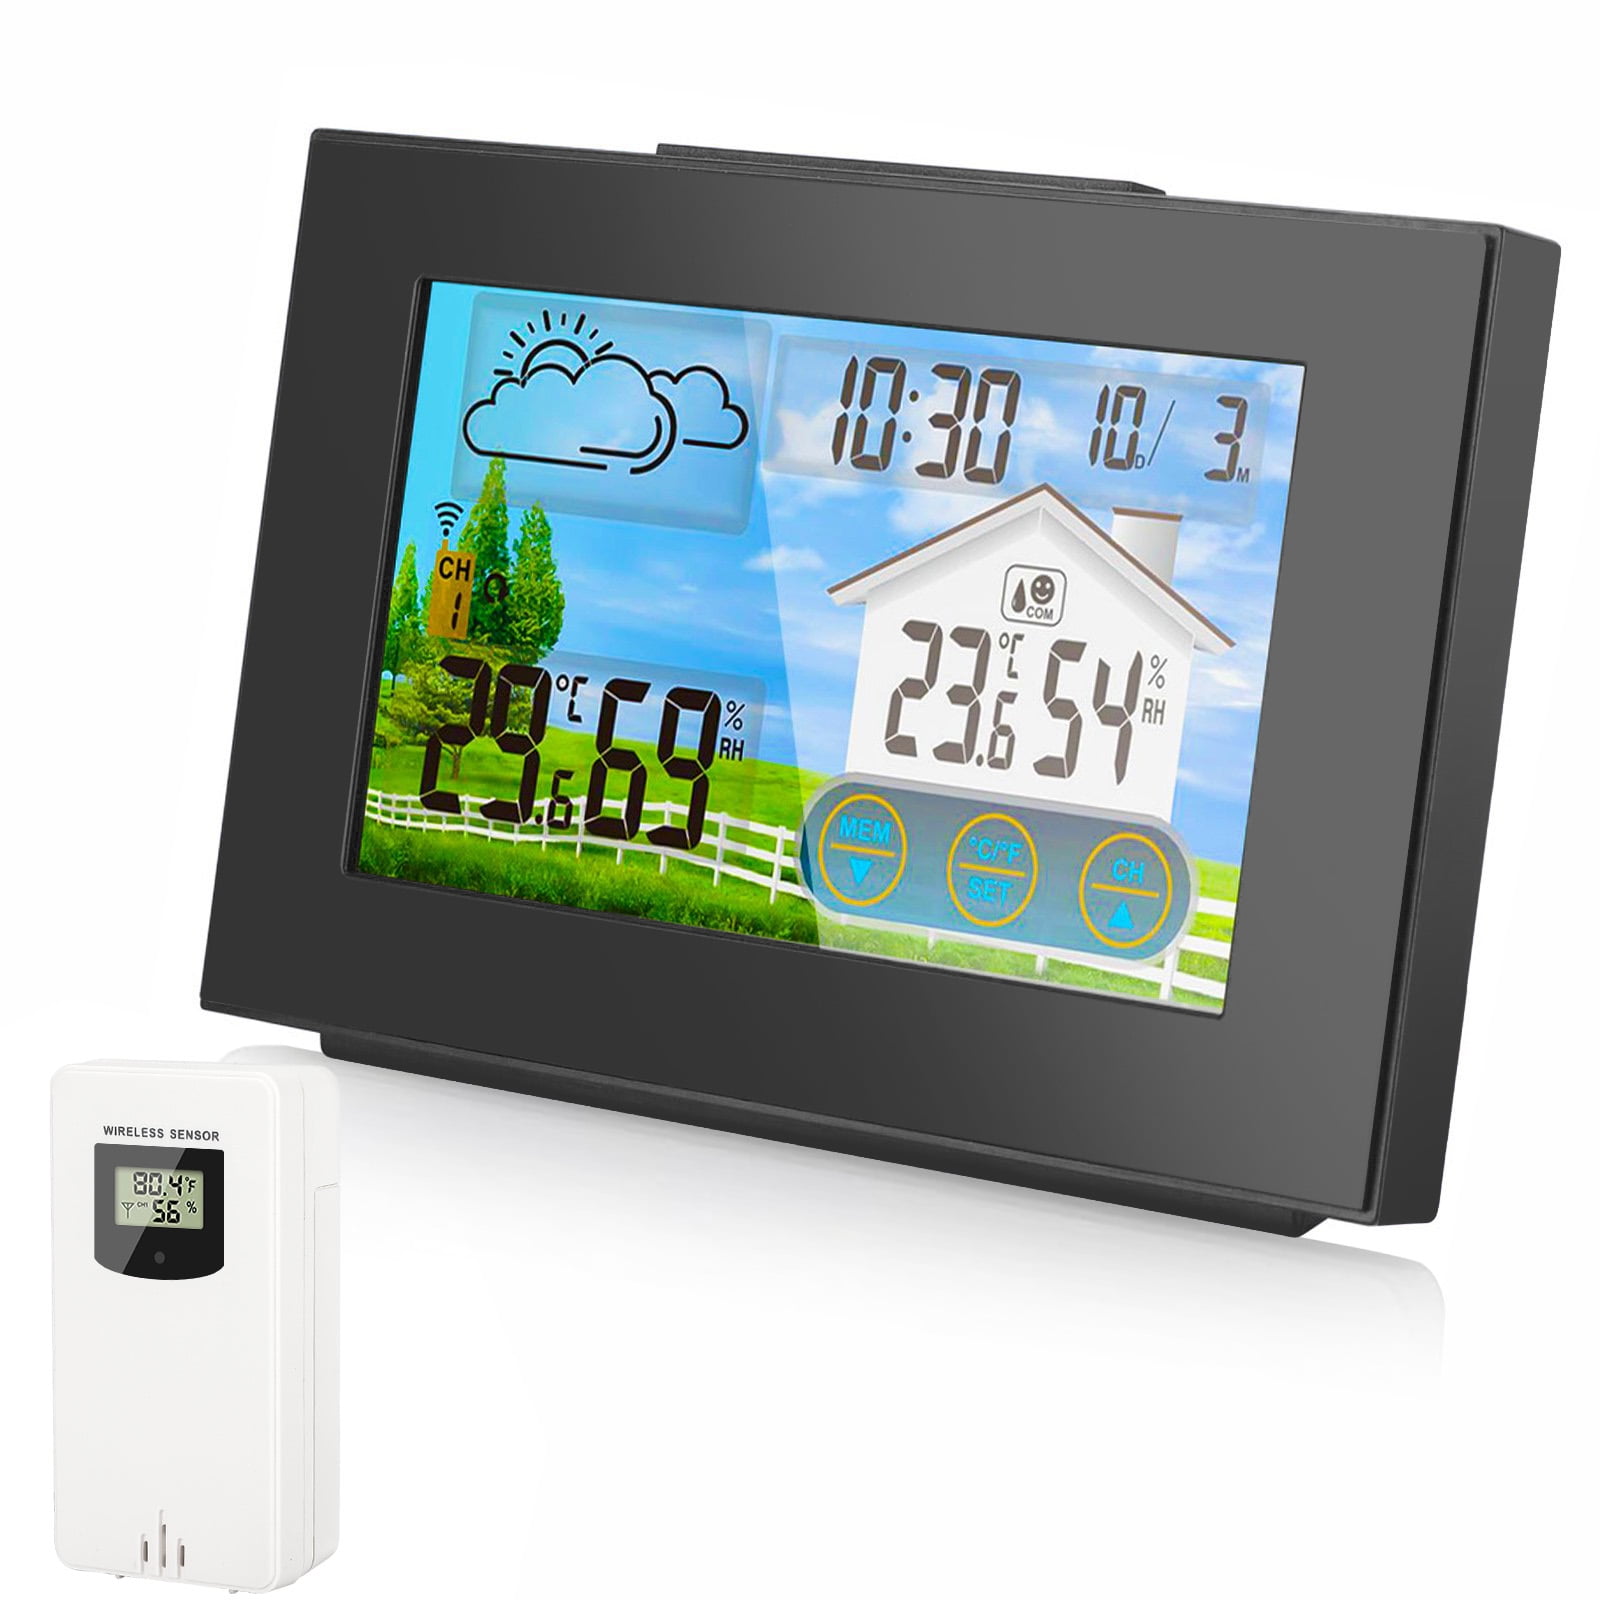 Portable Wireless Weather Station w/ Wind Sensor Temperature & Humidity NEW 